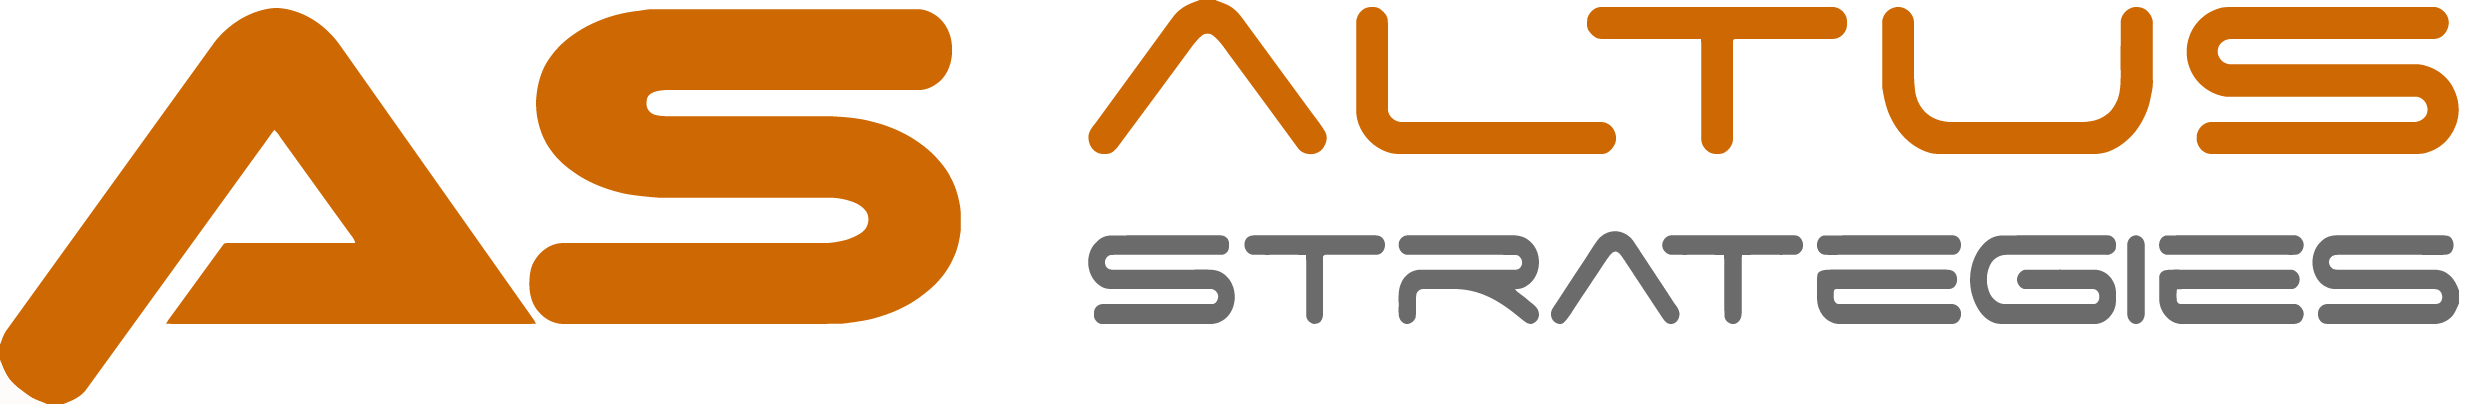 Altus Strategies Plc, Tuesday, February 16, 2021, Press release picture